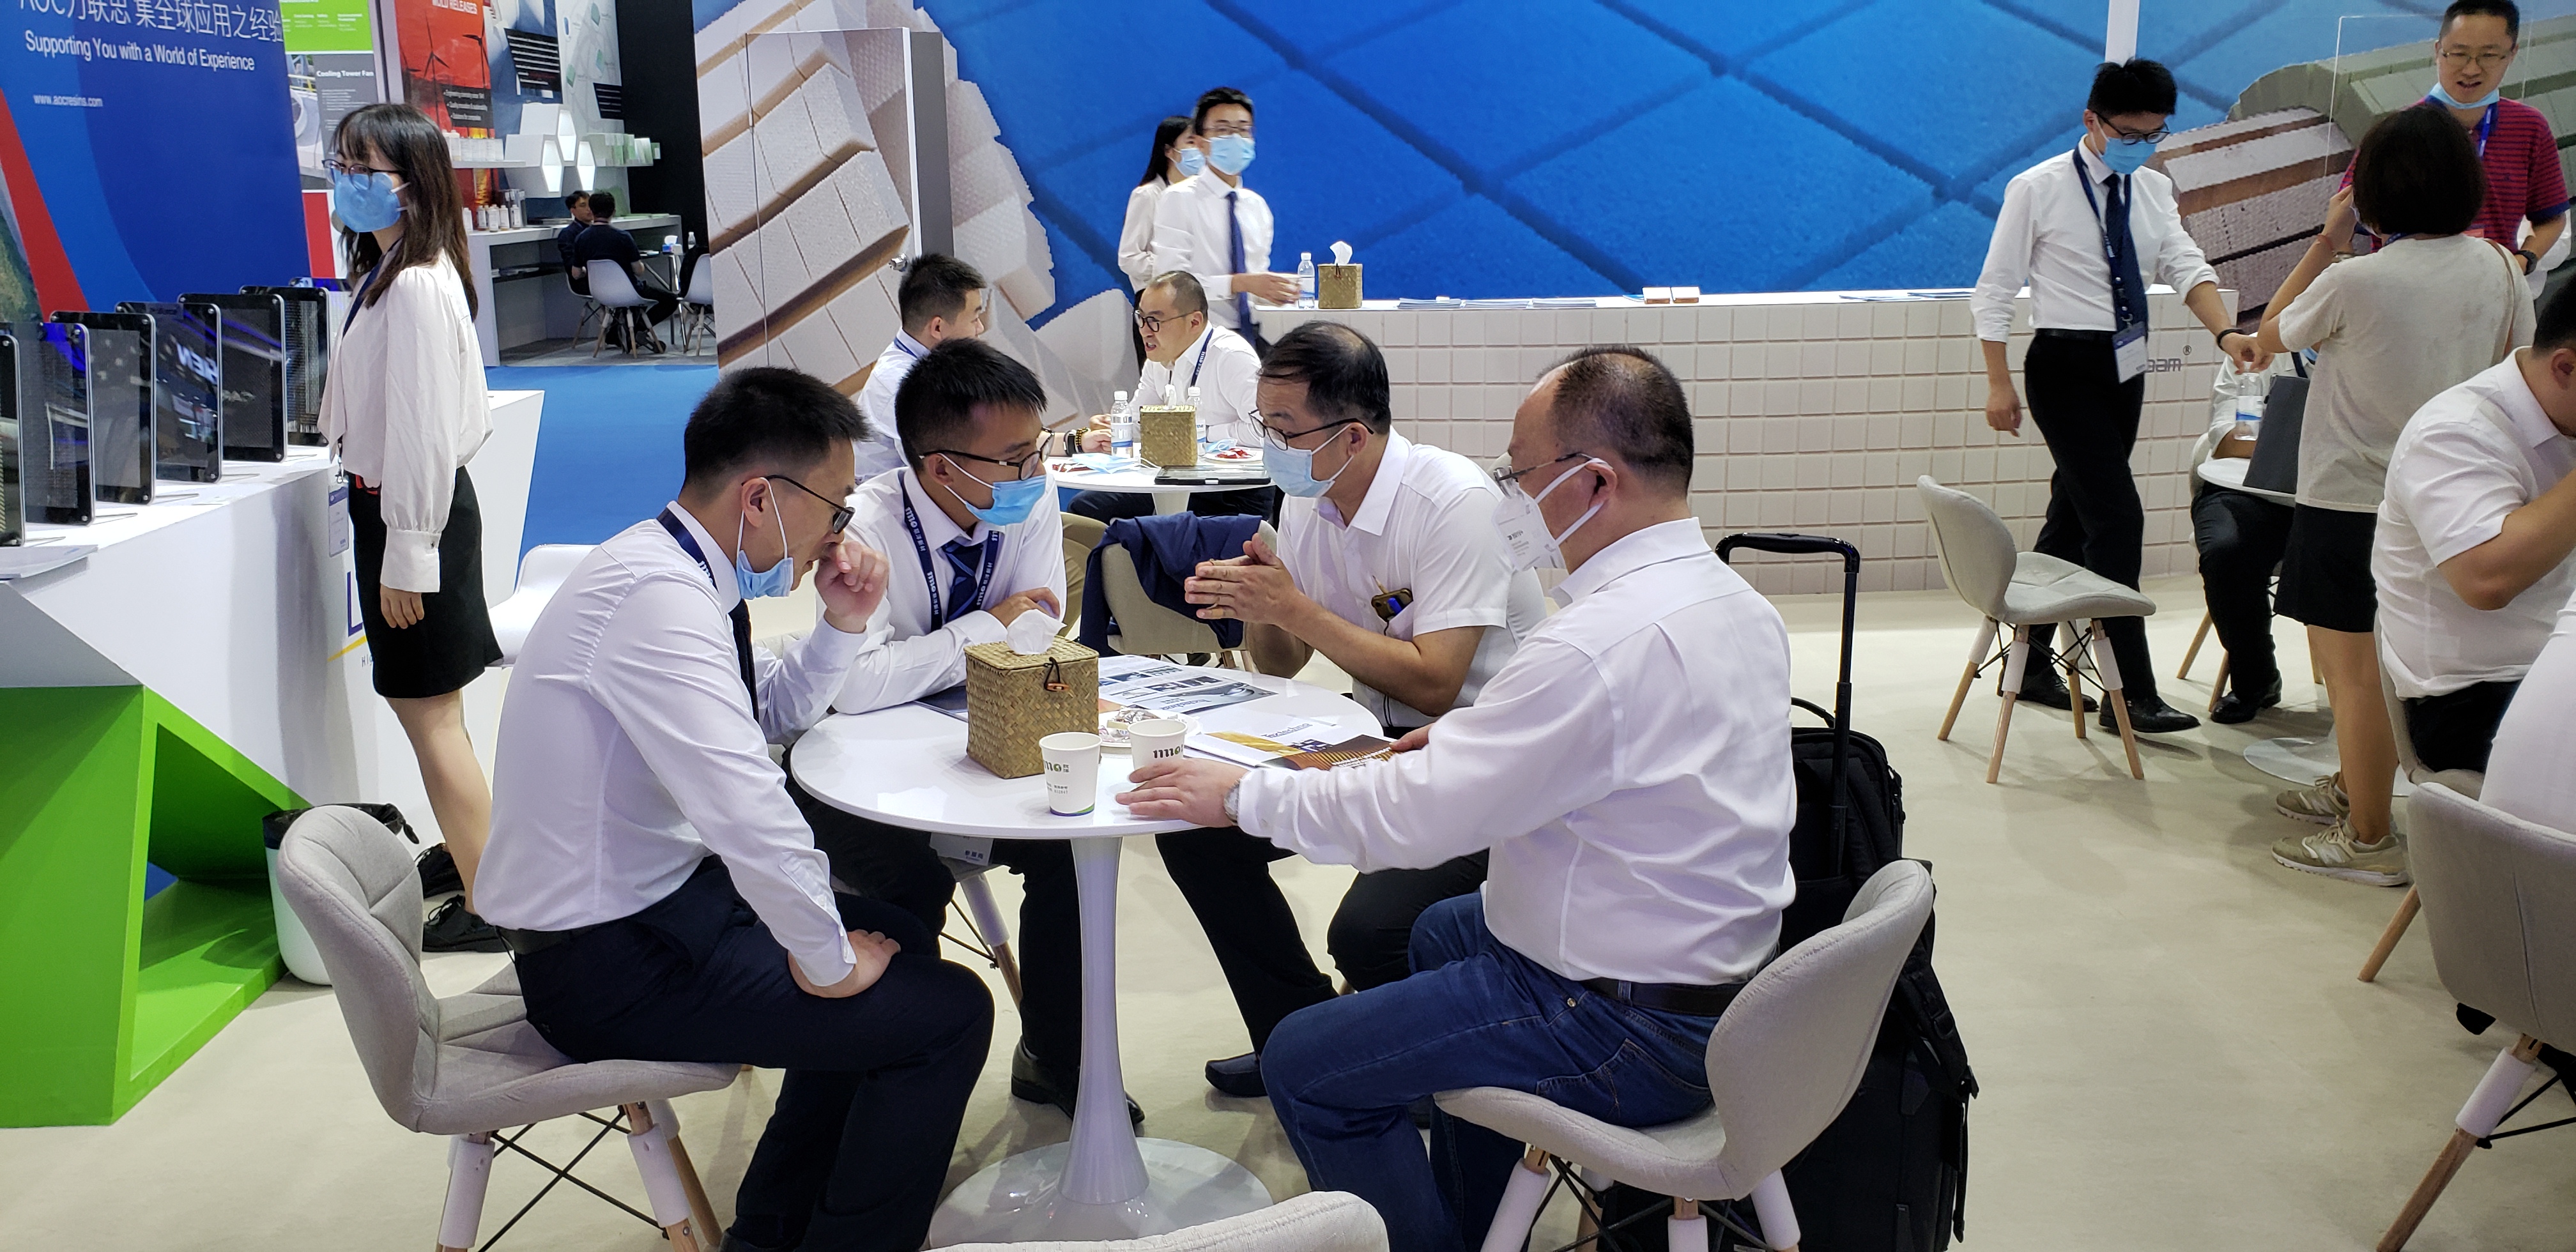 The China Composites show in Shanghai, China welcomed over 20,000 visitors to the exhibition.